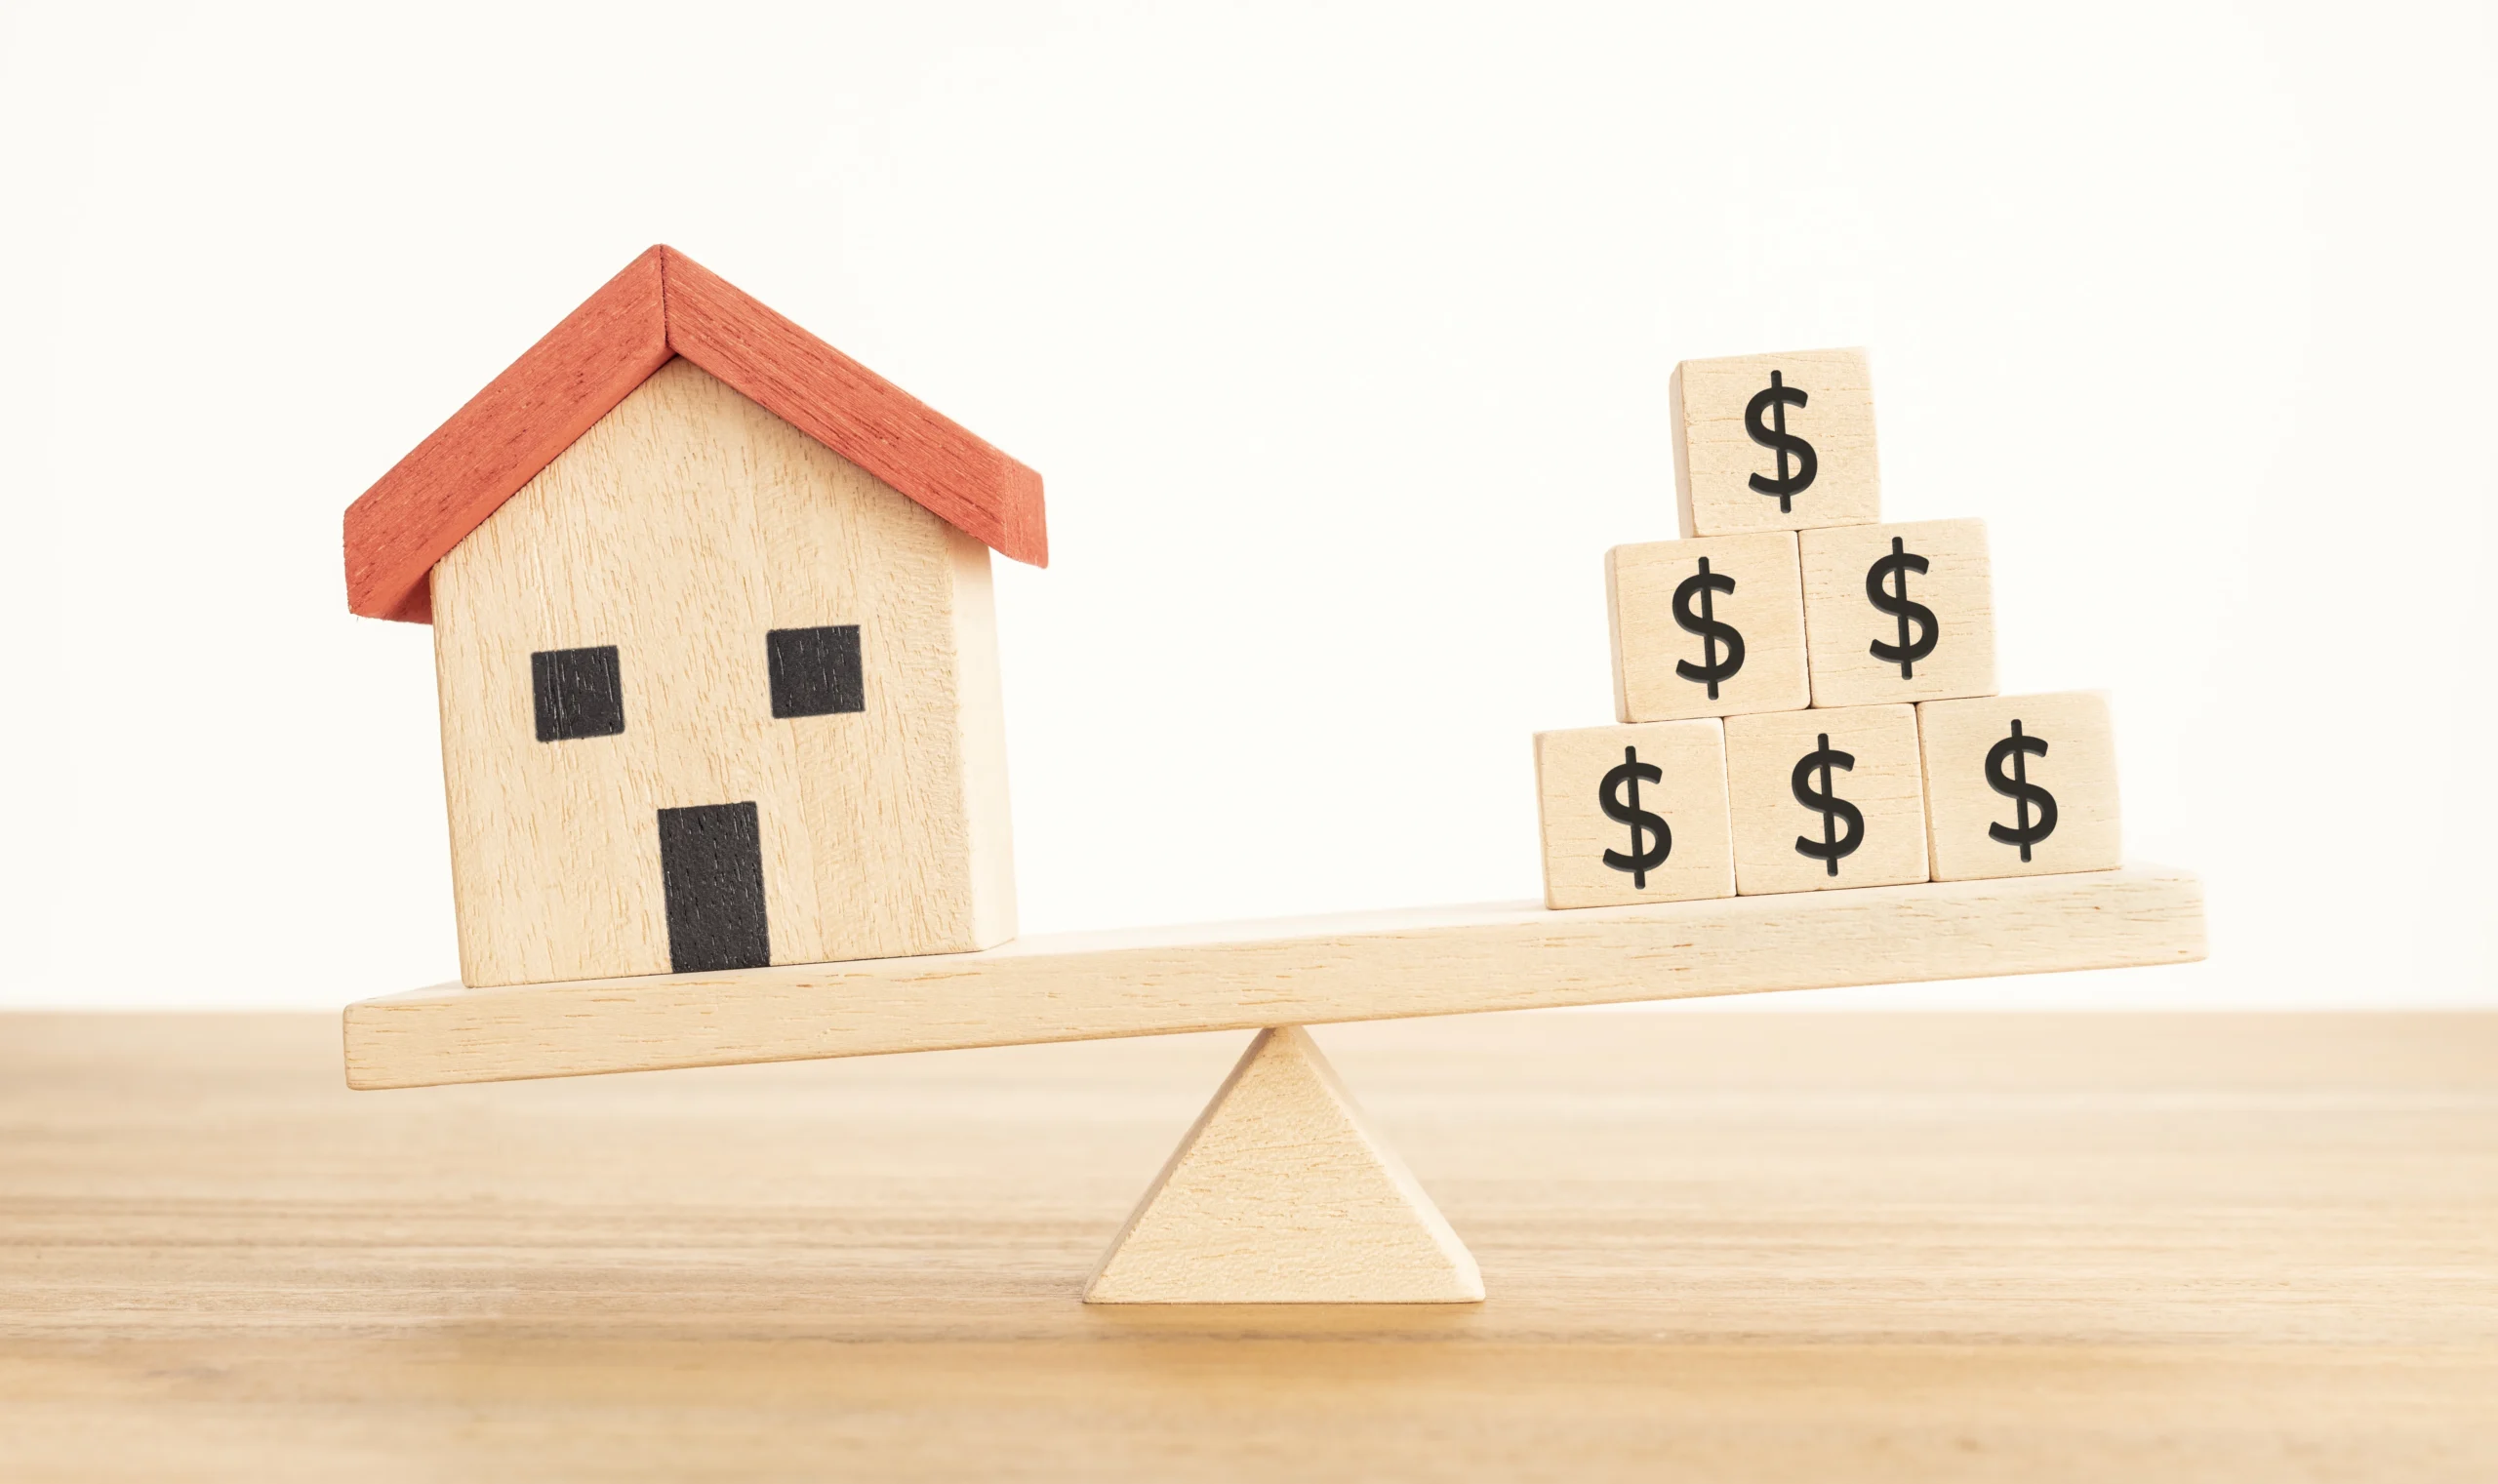 Image of house and dollar blocks on seesaw illustrating negative gearing for investment property